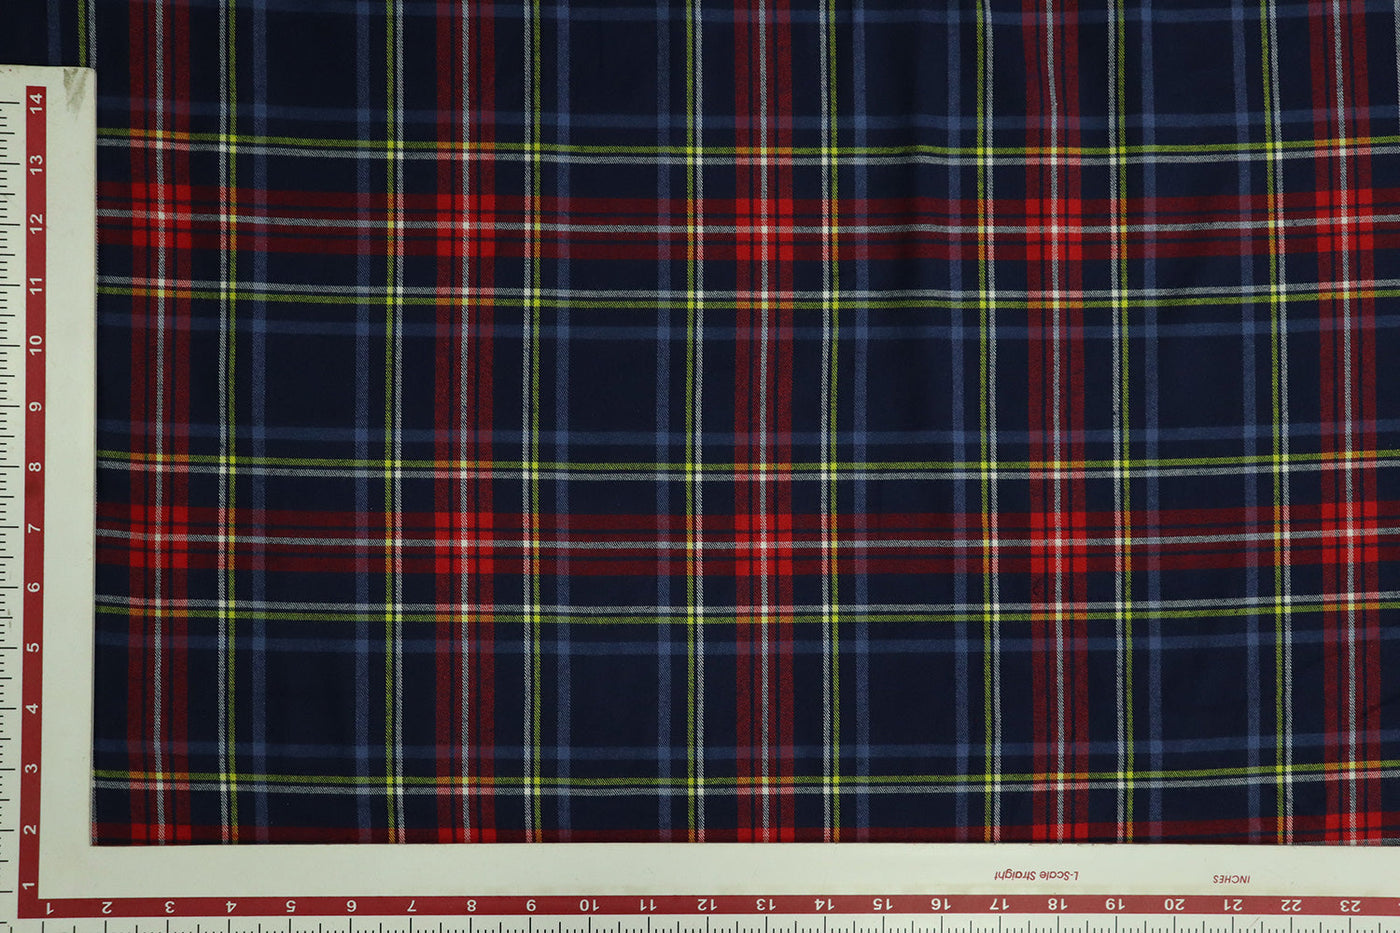 Precut Of 0.4 Meters Of Multicolor Checks Yarn Dyed Cotton Blend Twill Check Fabric